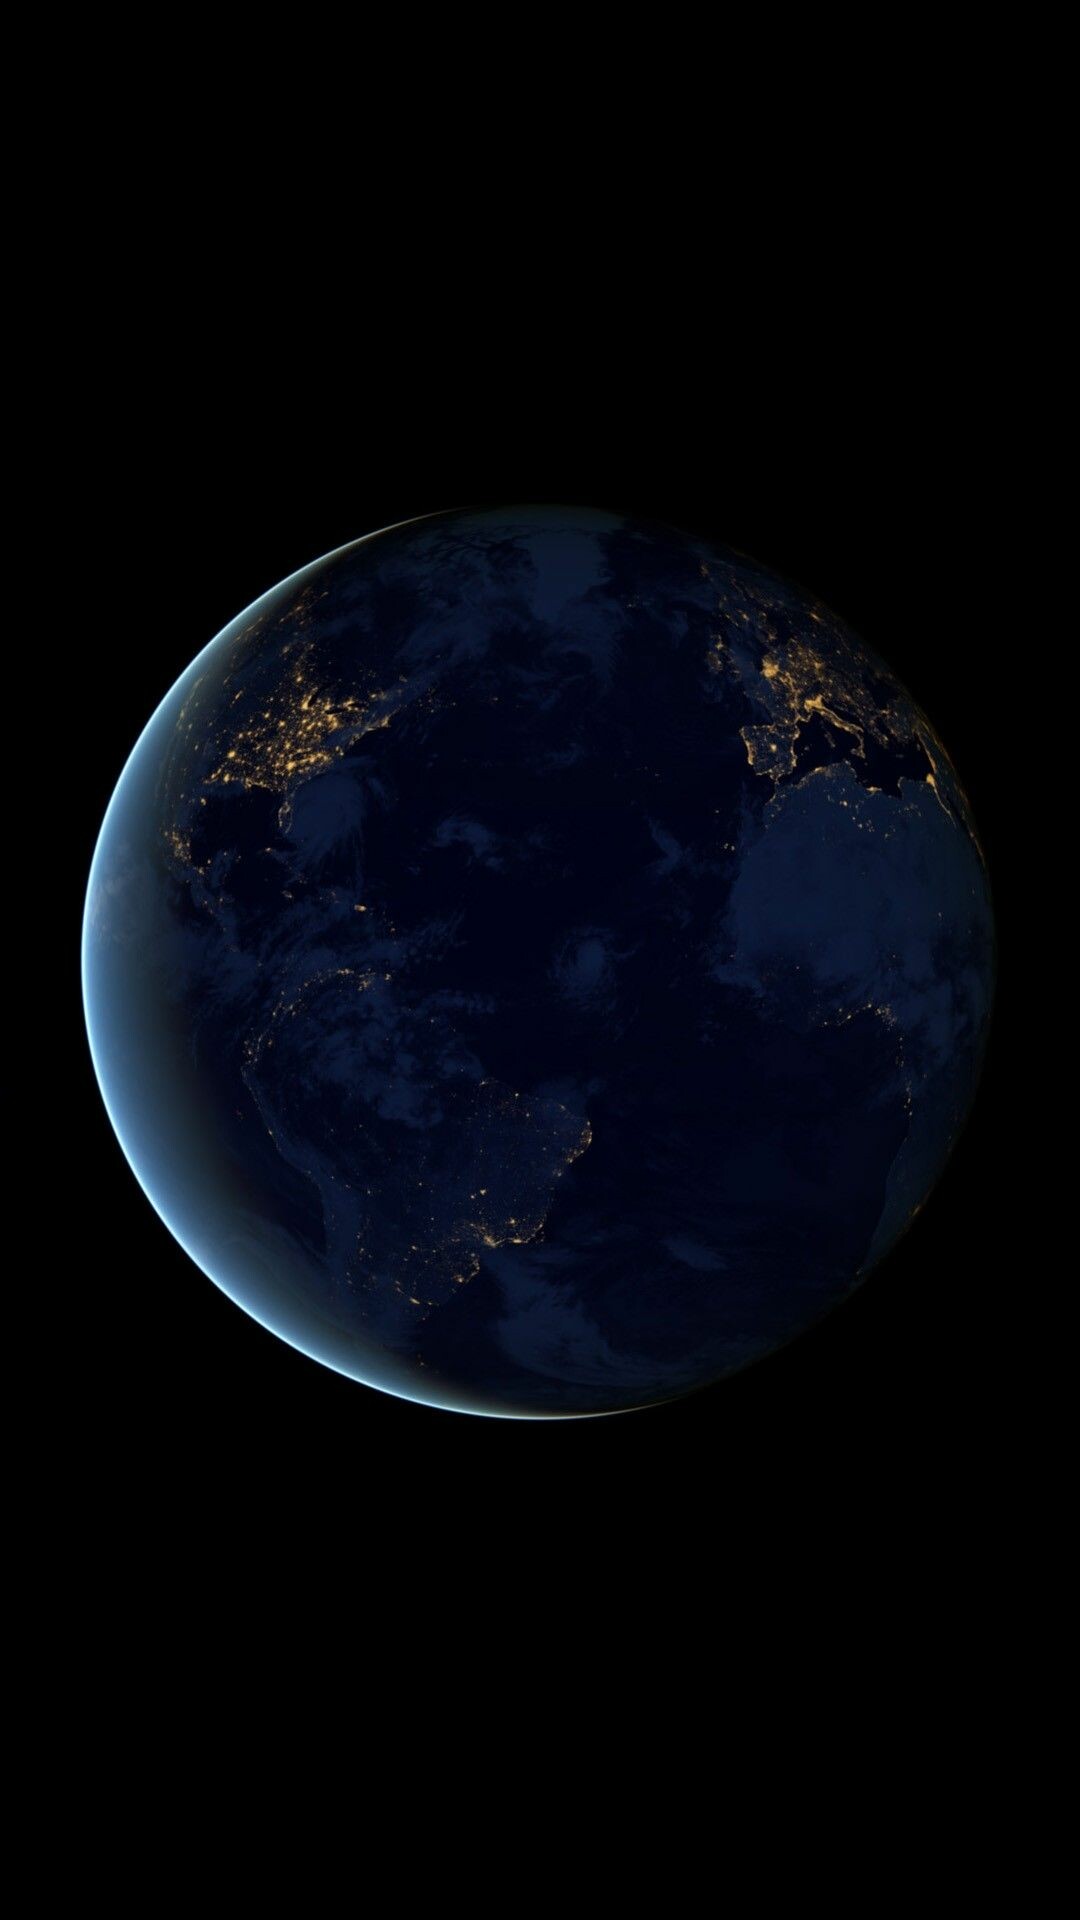 Earth at Night: The Blue Planet duskiness, Galaxy, Solar System, Cosmos. 1080x1920 Full HD Background.